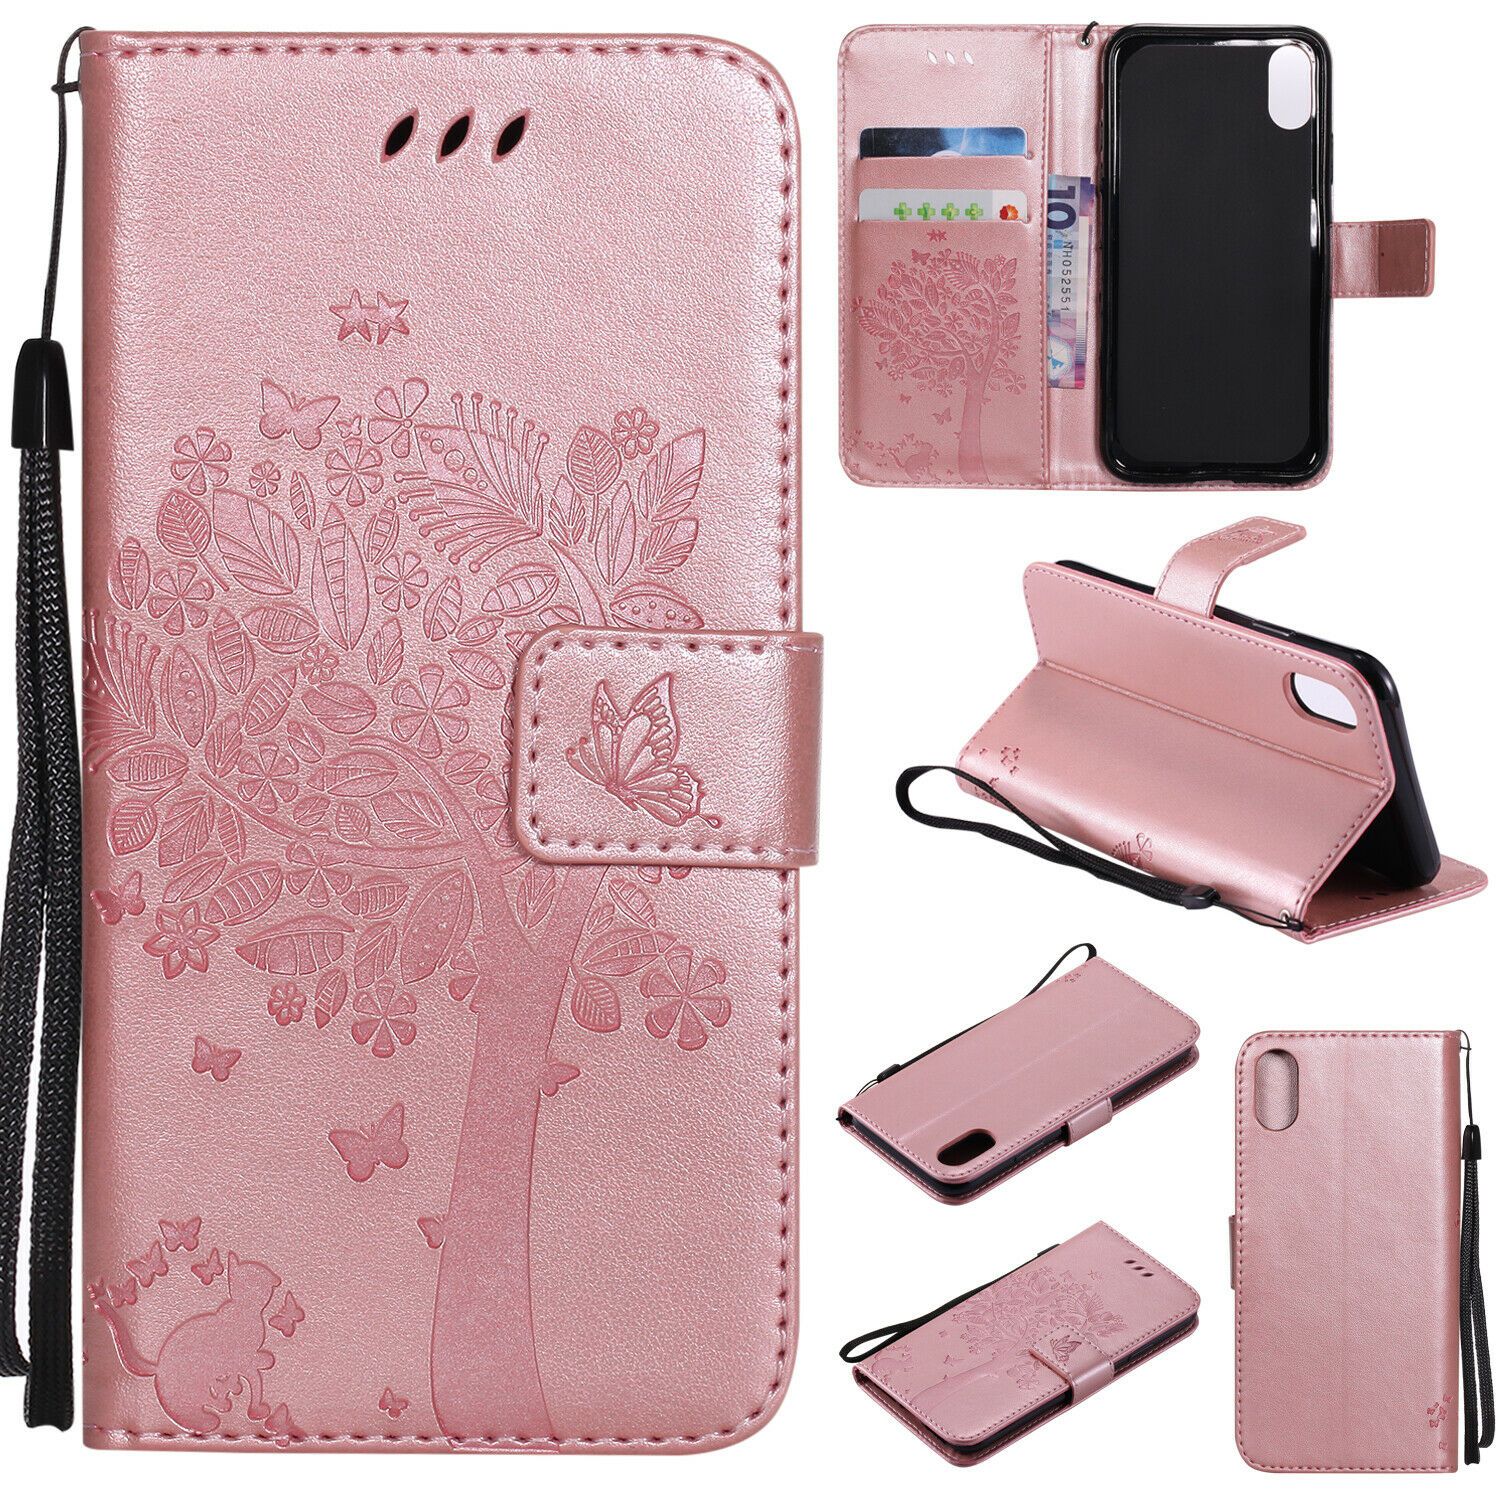 Magnetic Leather Wallet Case For iPhone 8 7 6s Plus X XS MAX XR Flip Cover Stand stekim-92 Rose gold iPhone6/6S 